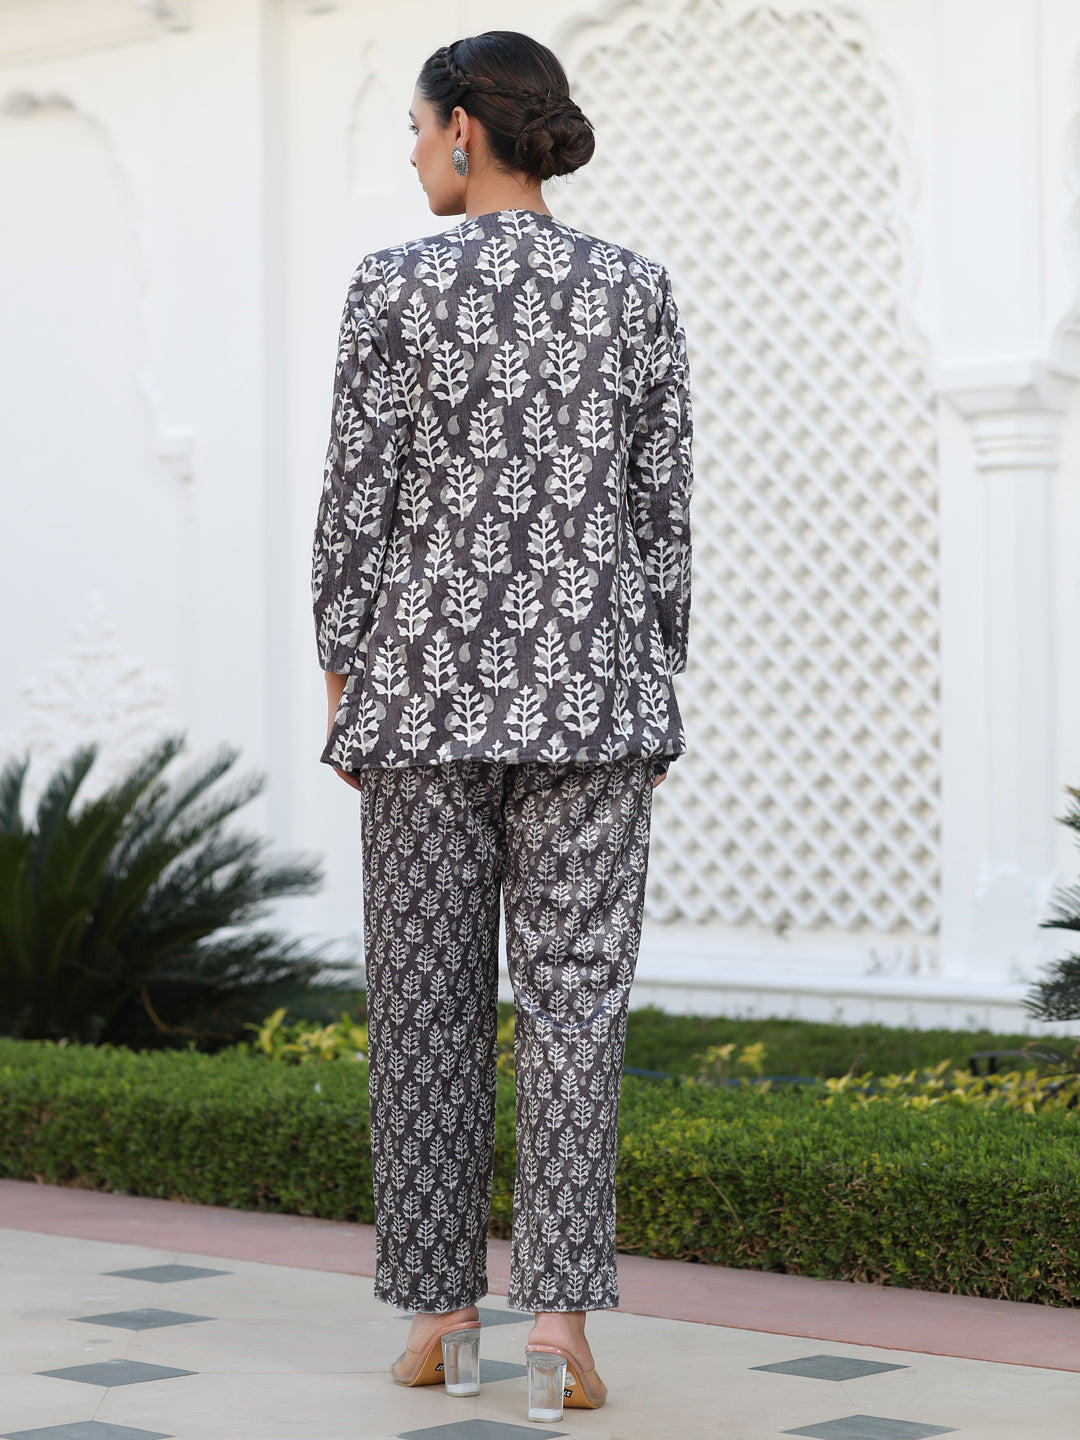 Embroidered Grey Printed Velvet Jacket With Cream Crop Top And Printed Velvet Pants